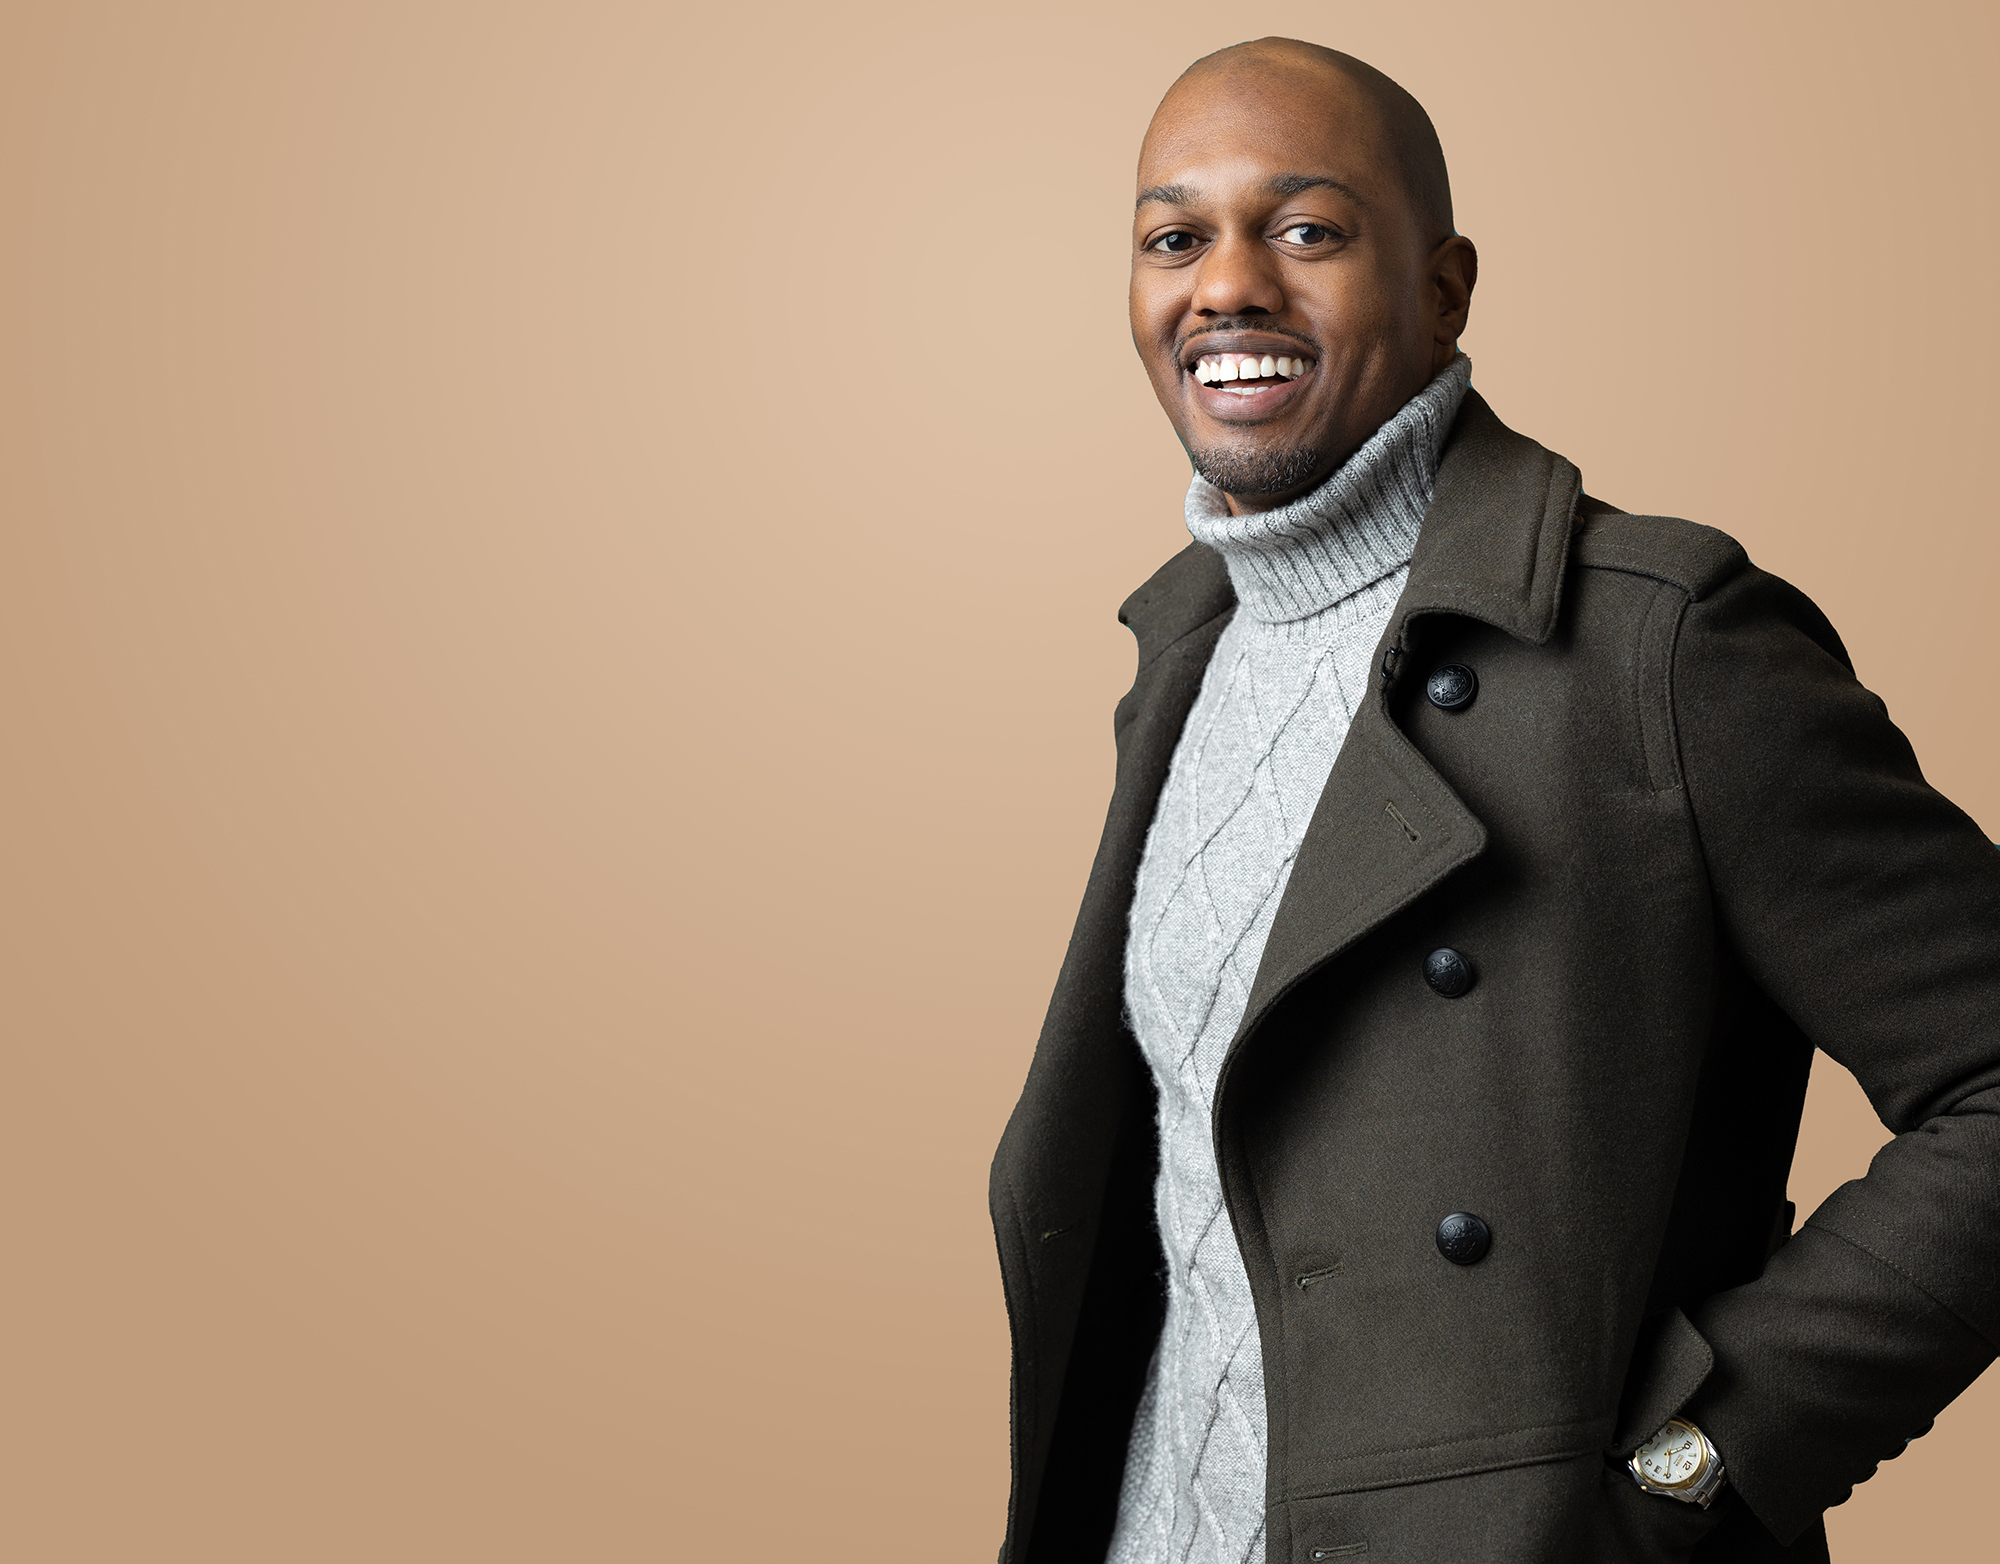 a black man in company matching program apparel posing on a beige background.